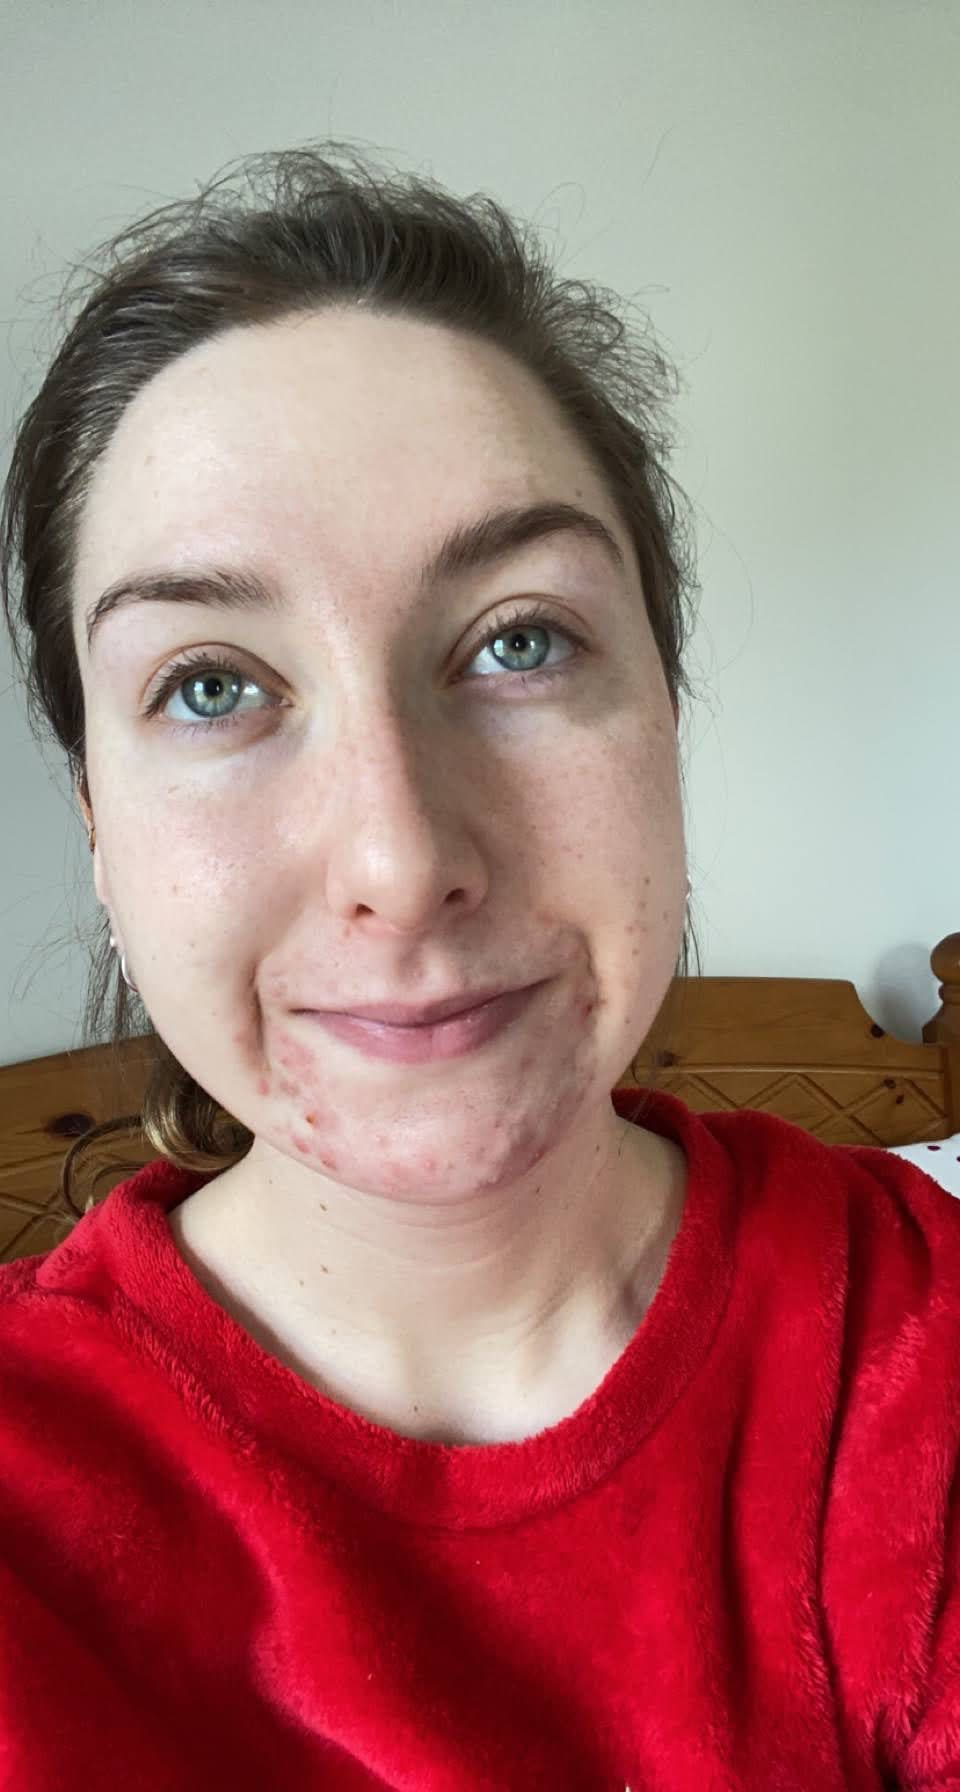 Kate found a solution for her acne using data and artificial intelligence